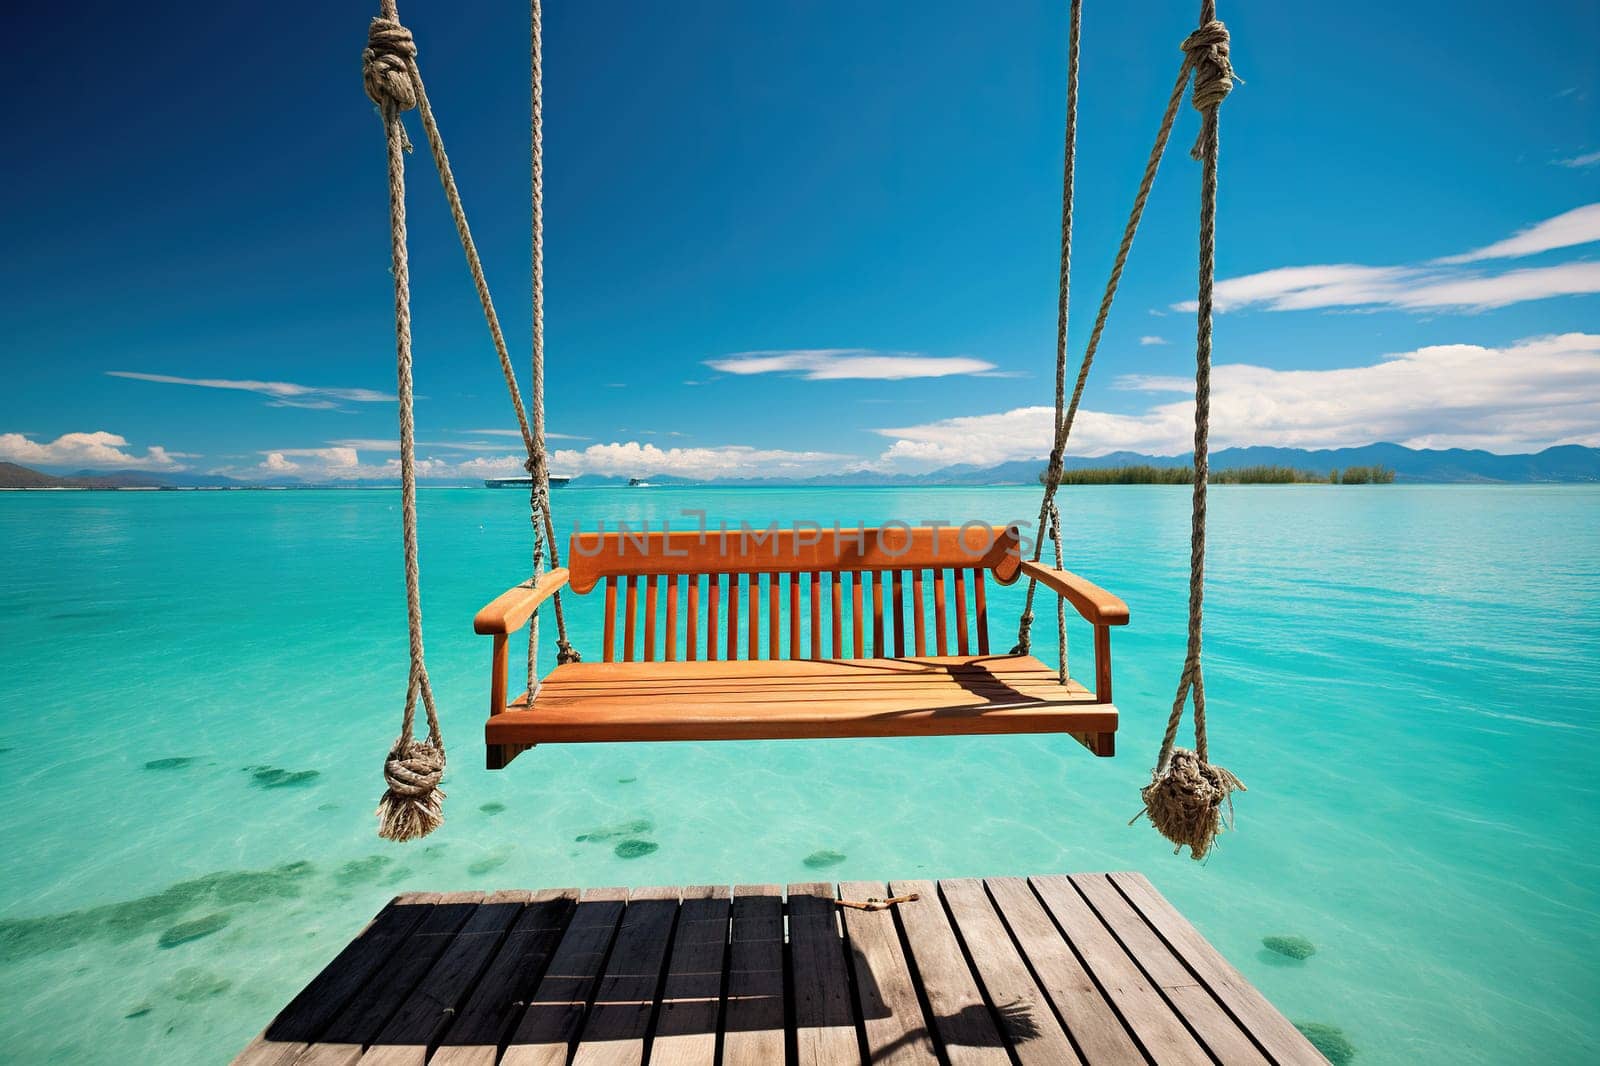 Swing over clear water. Paradise holiday.